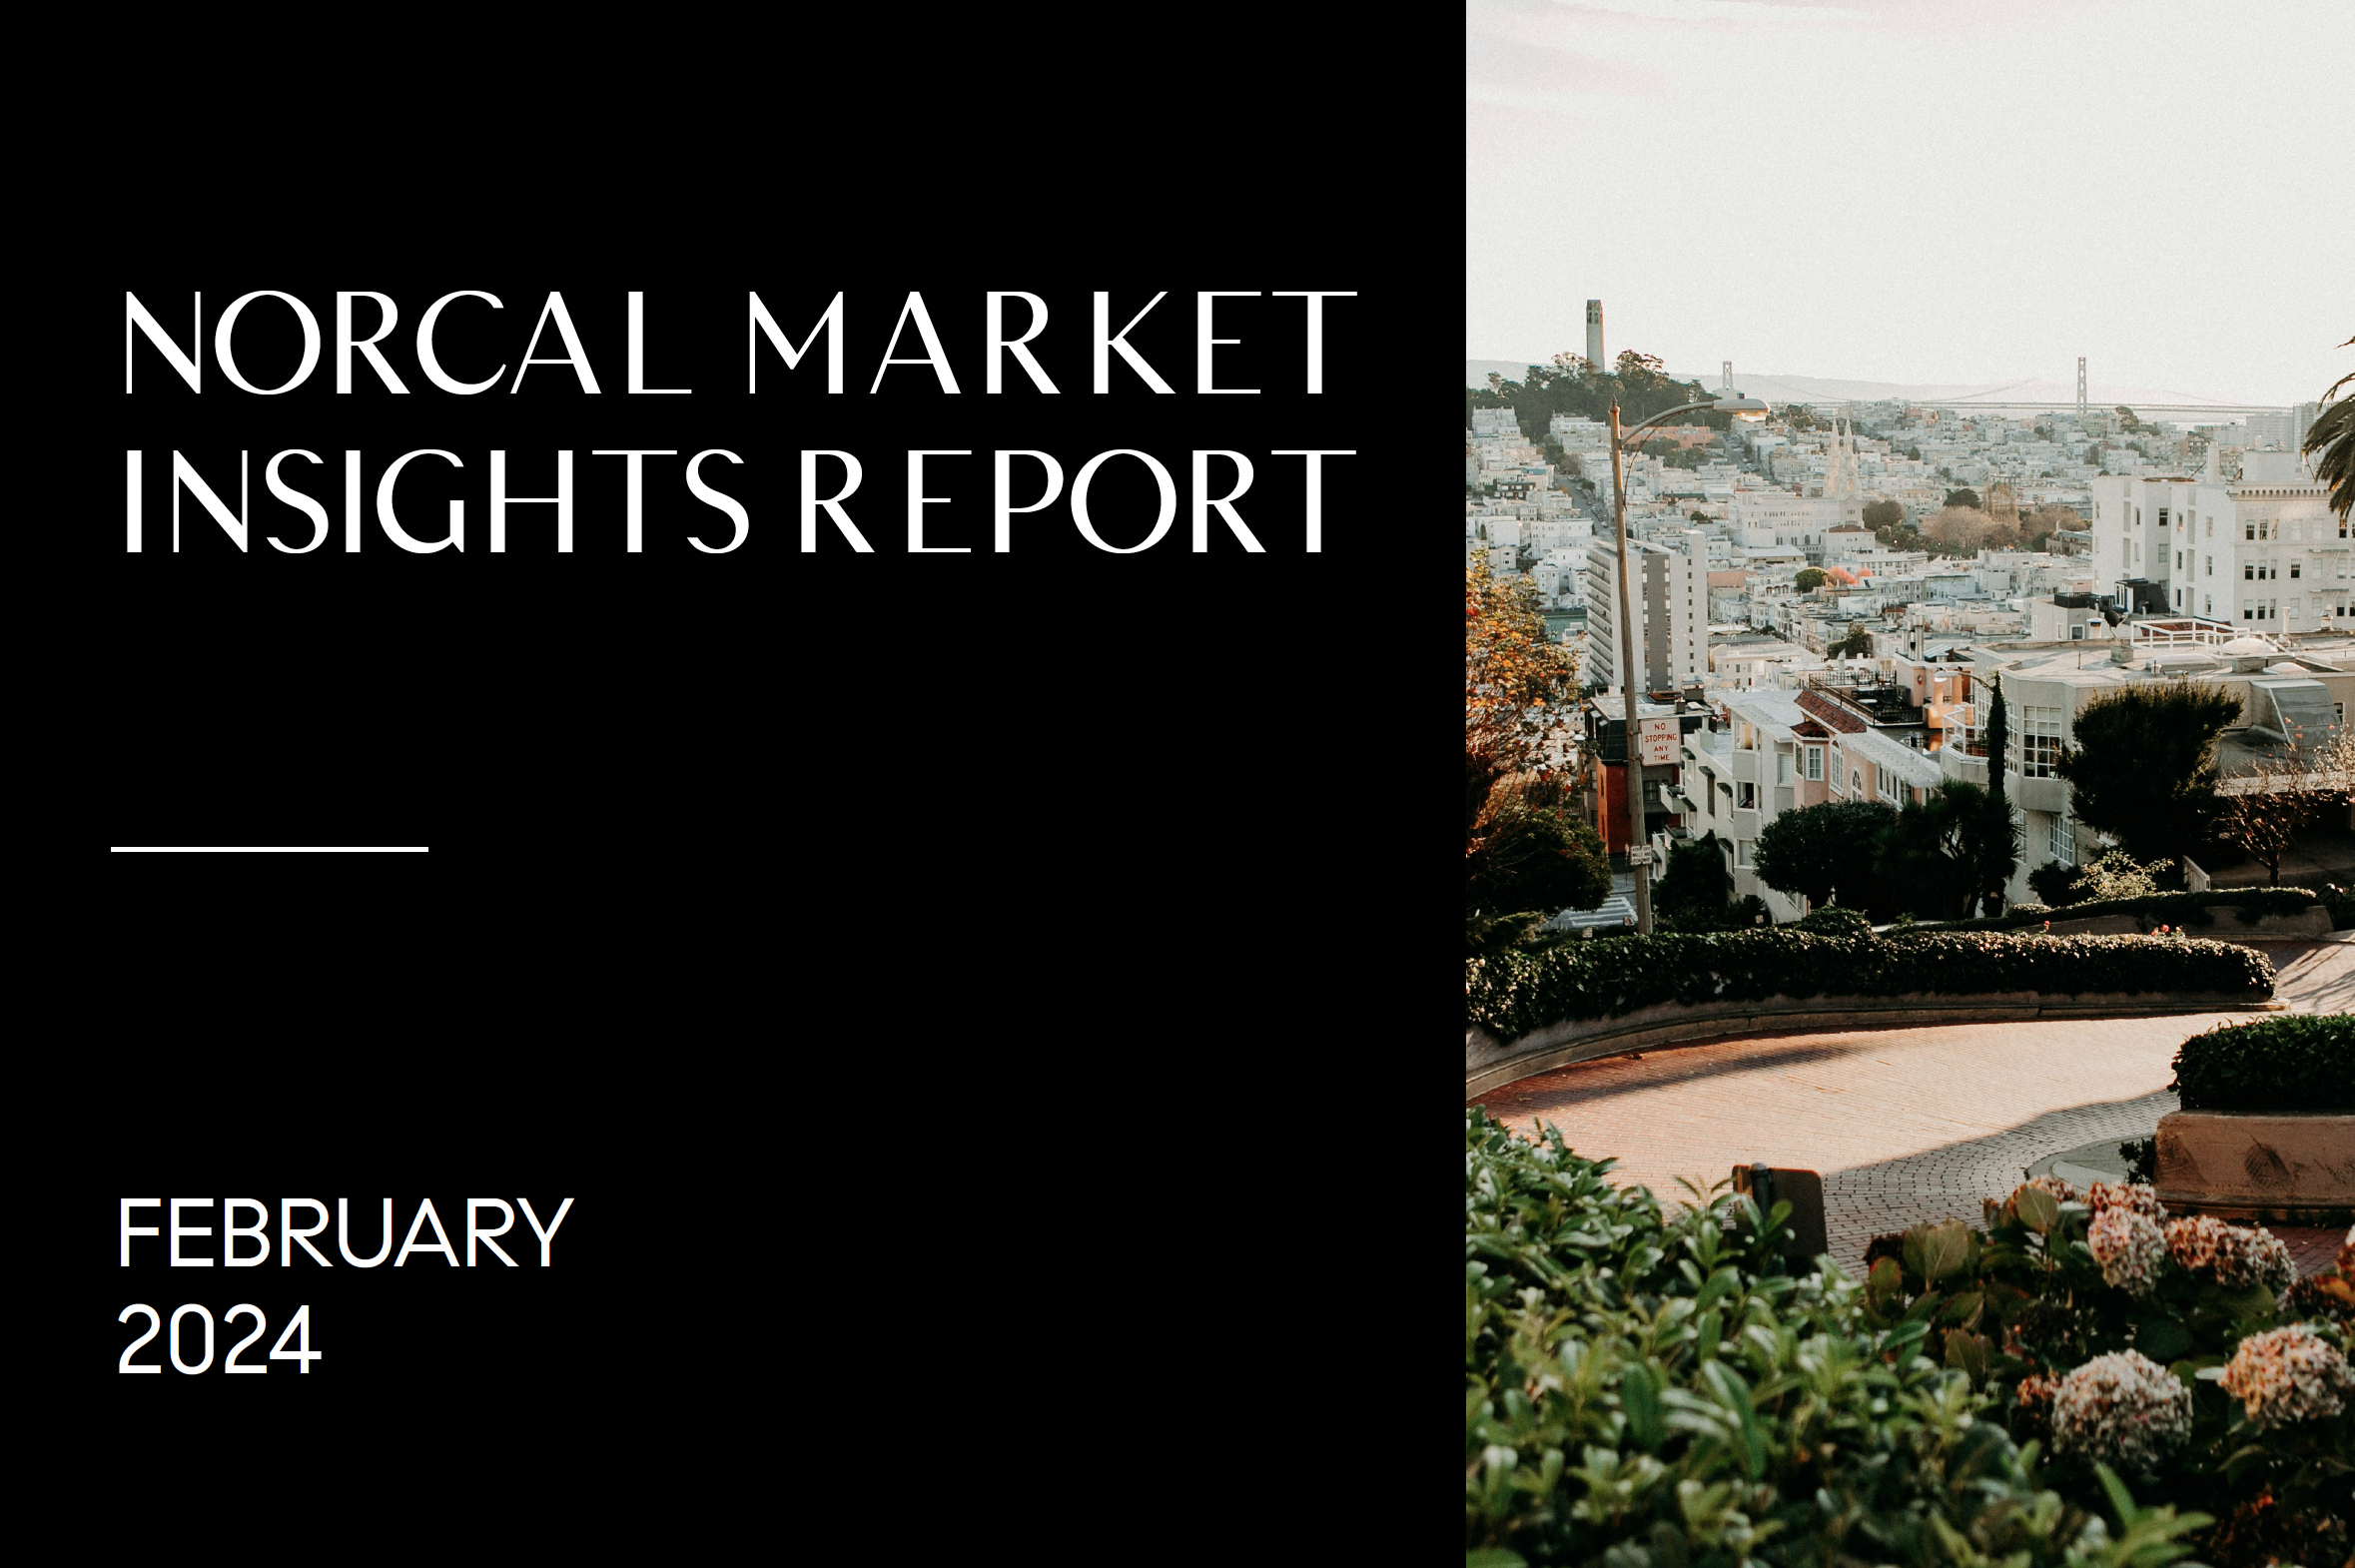 February 2024 Norcal Market Insights Report